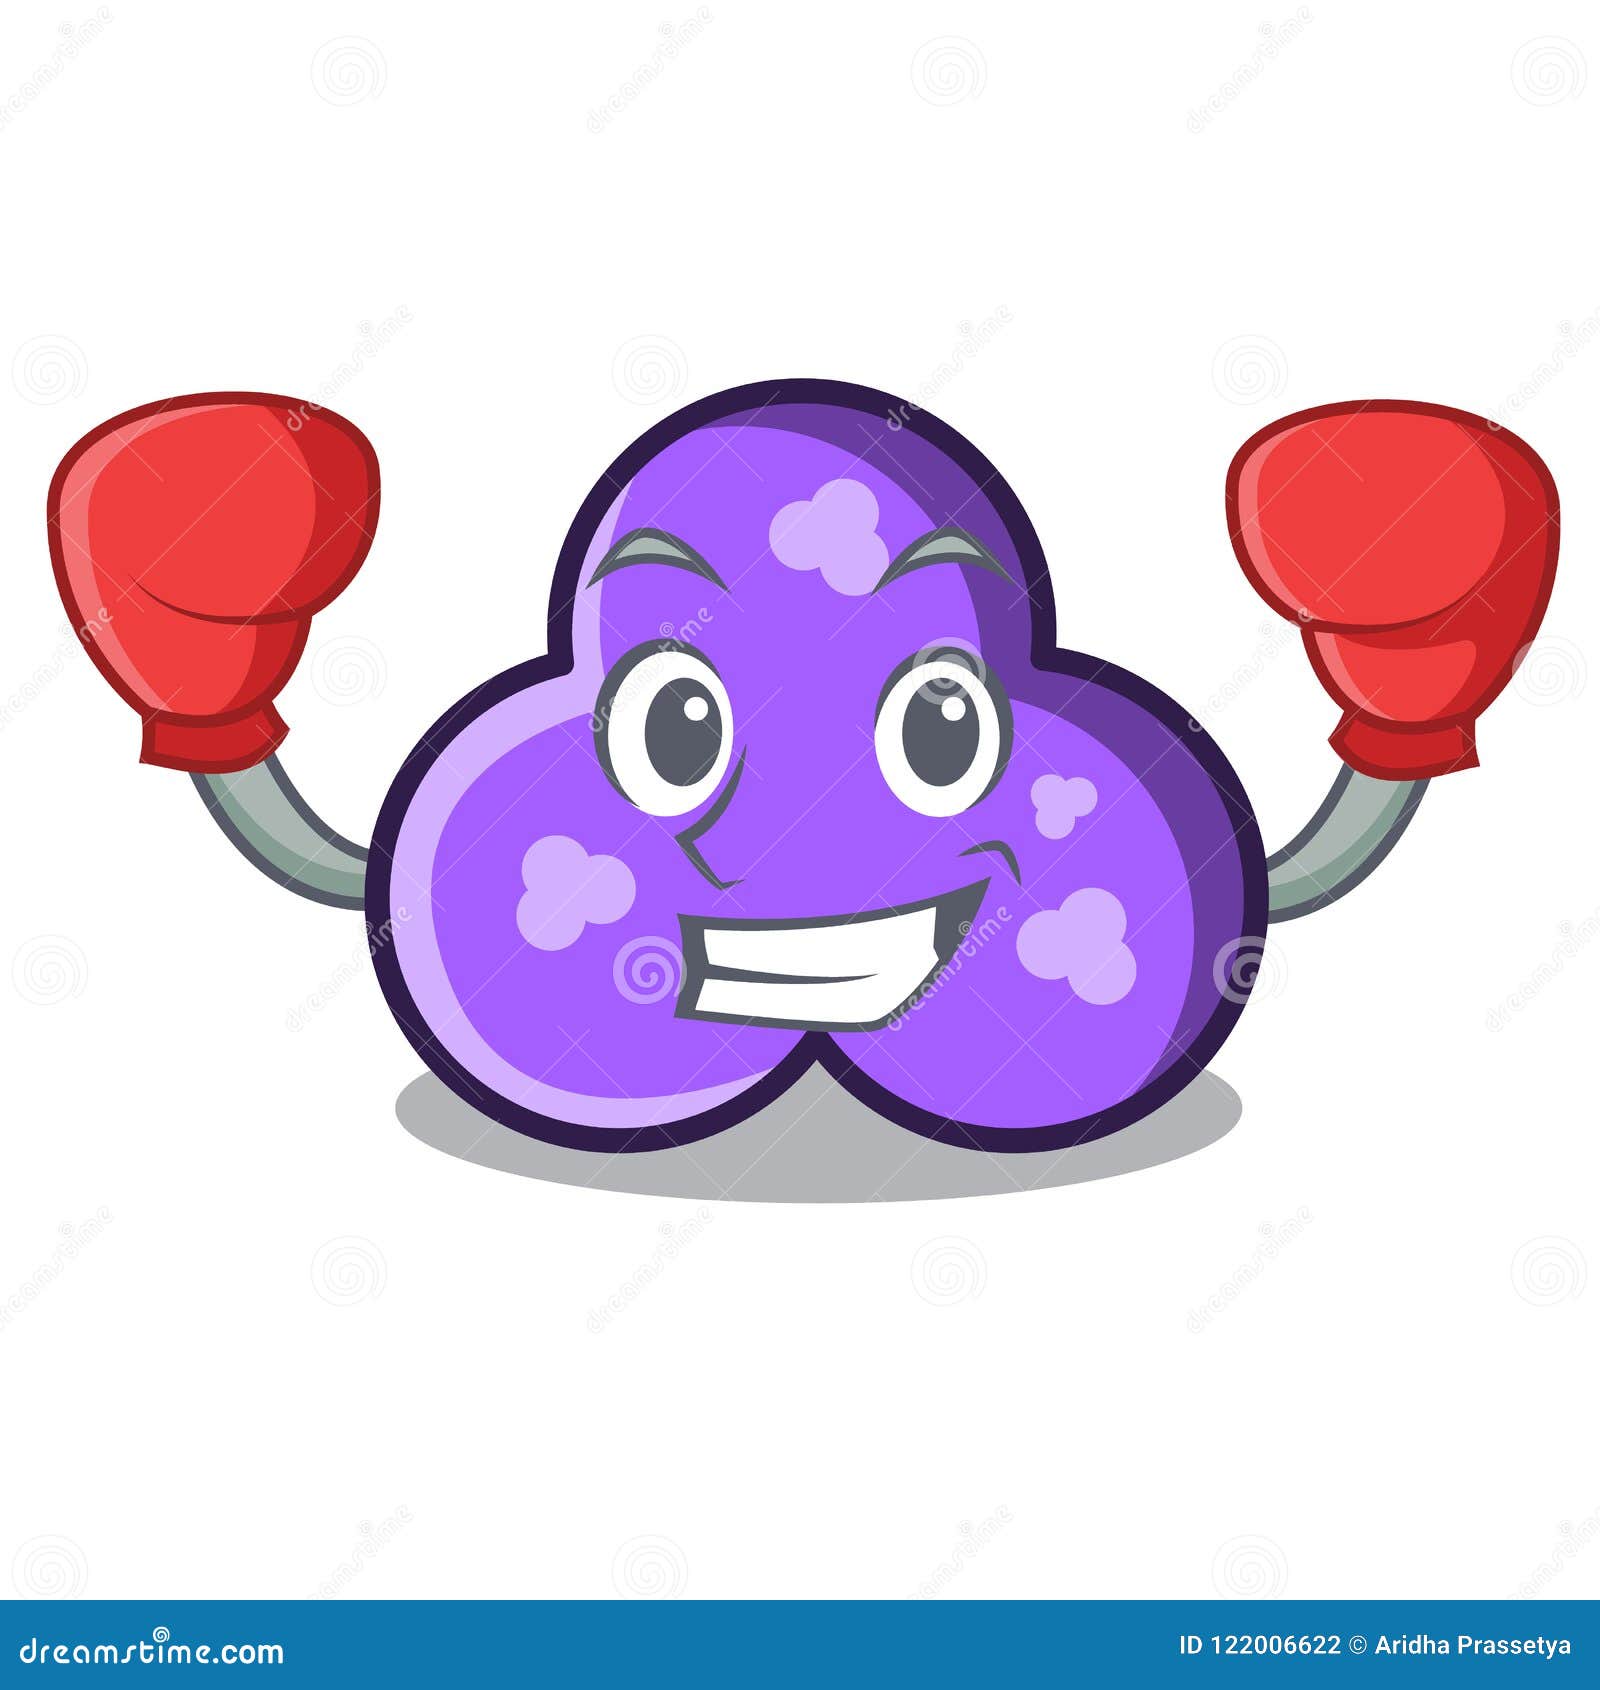 boxing trefoil character cartoon style